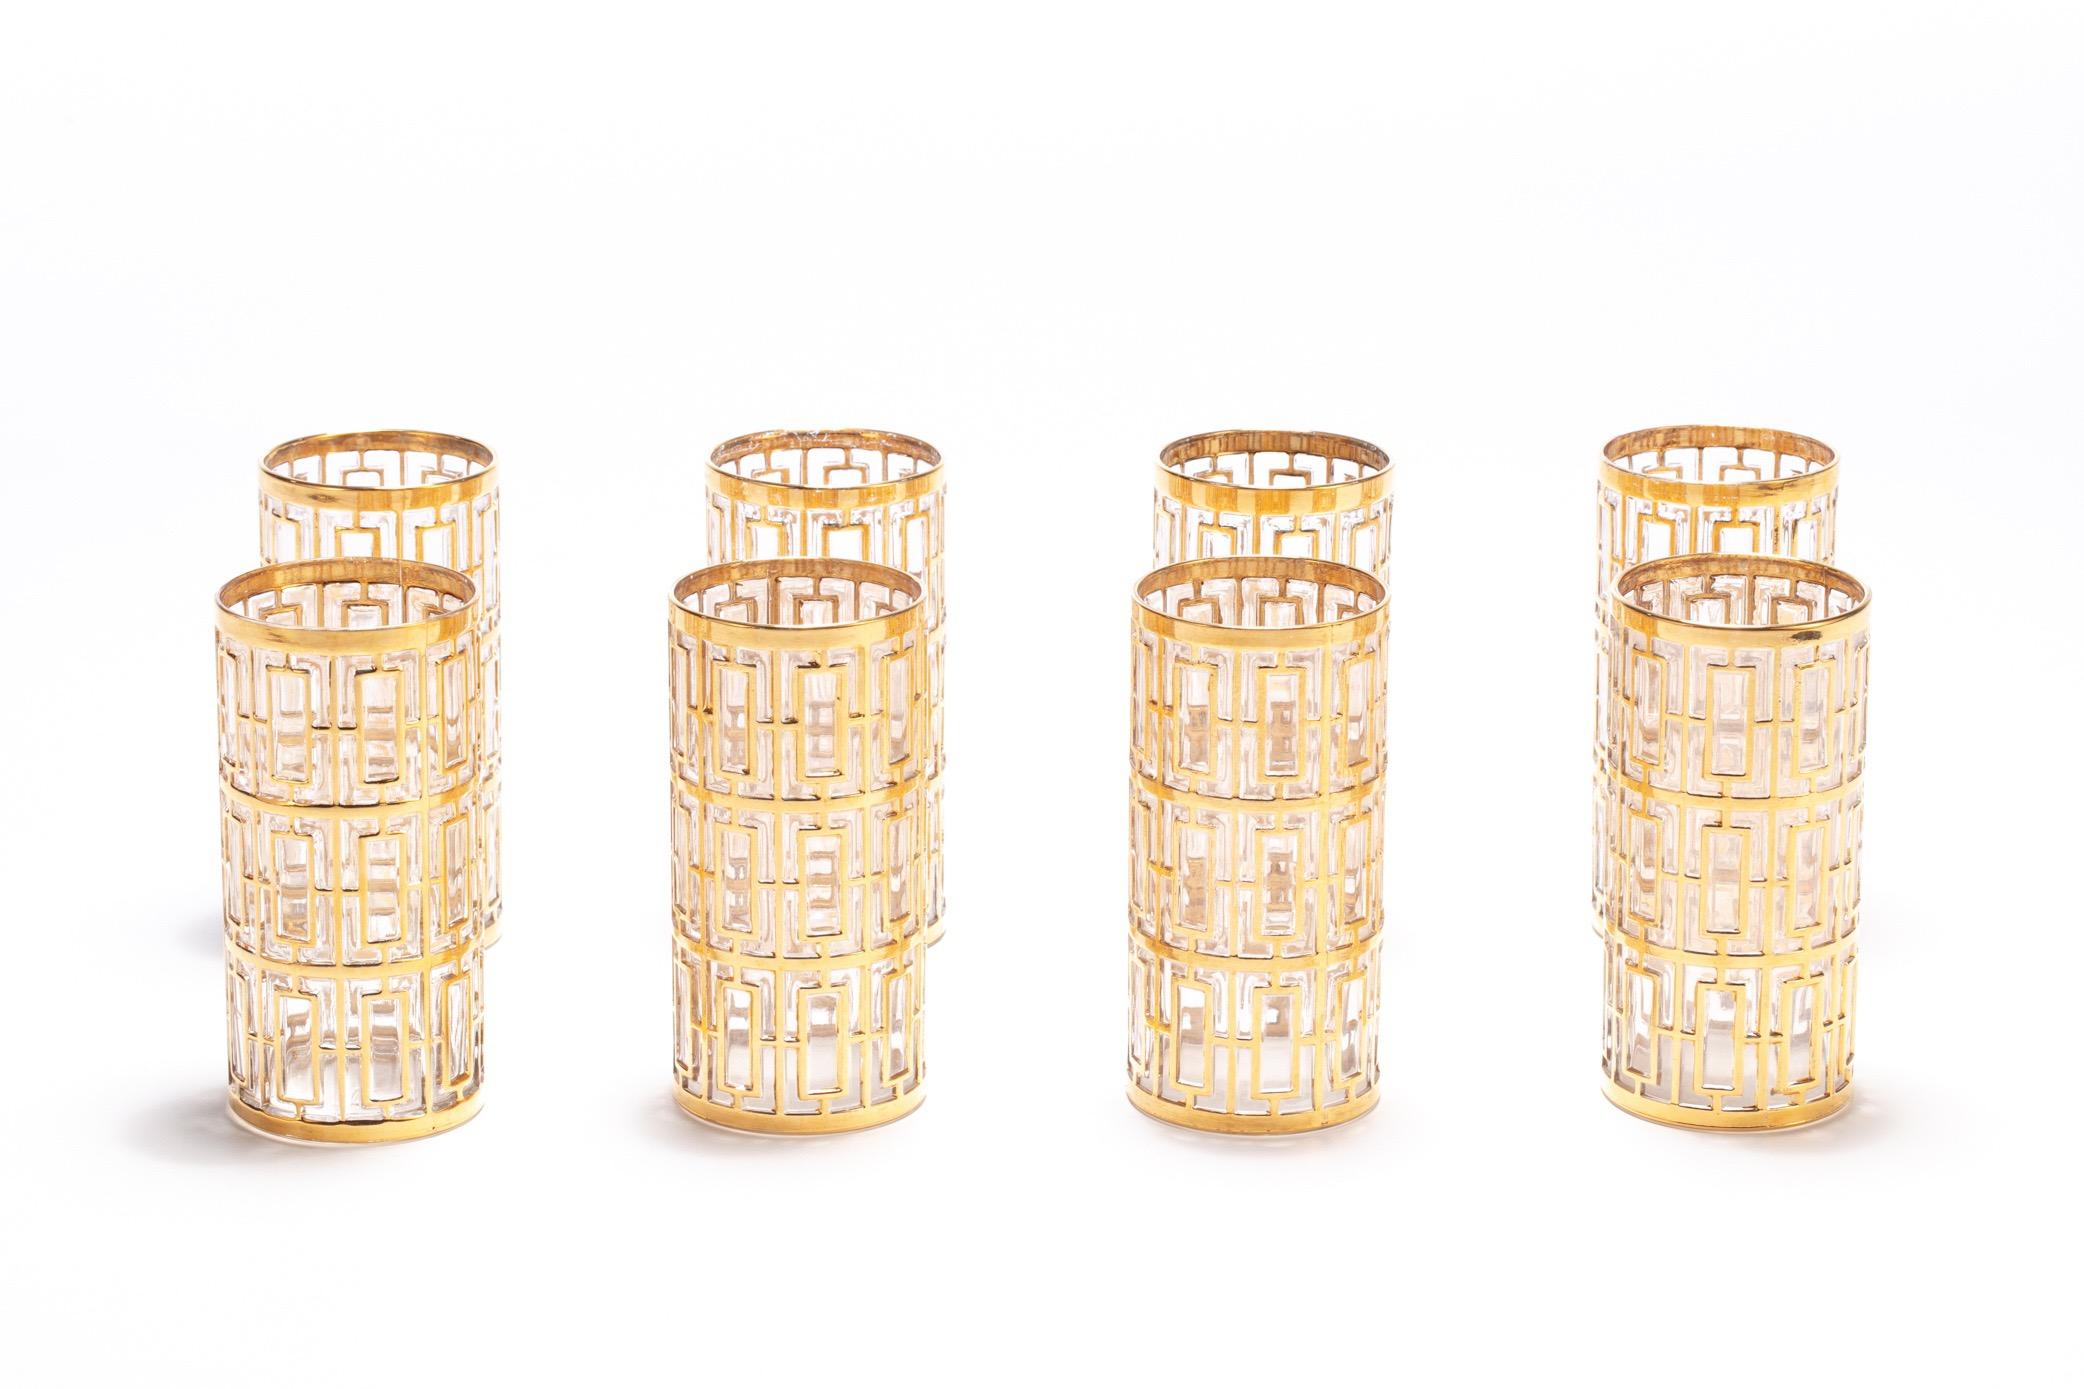 If you're looking for the best in sexy, Hollywood Regency style glasses, you've found them. These vintage glasses were manufactured by the Imperial Glass Company in Ohio sometime between 1965 and 1979 and feature the iconic trellis pattern - the